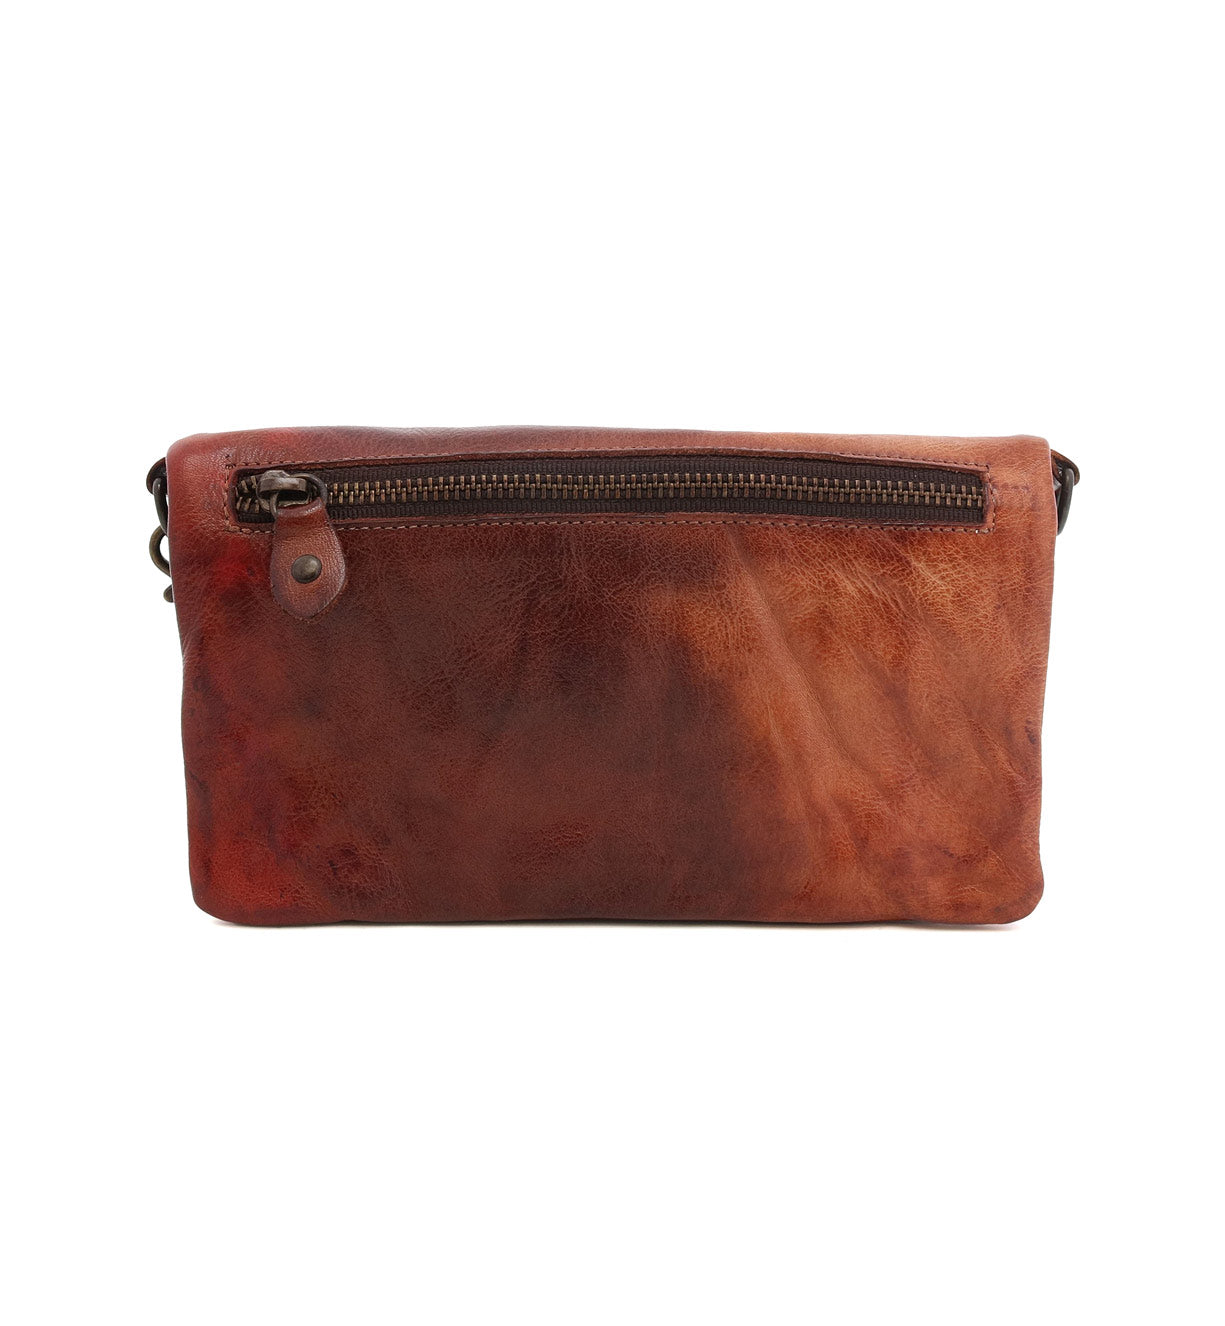 A brown leather Bed Stu Cadence cross body bag with a zipper.